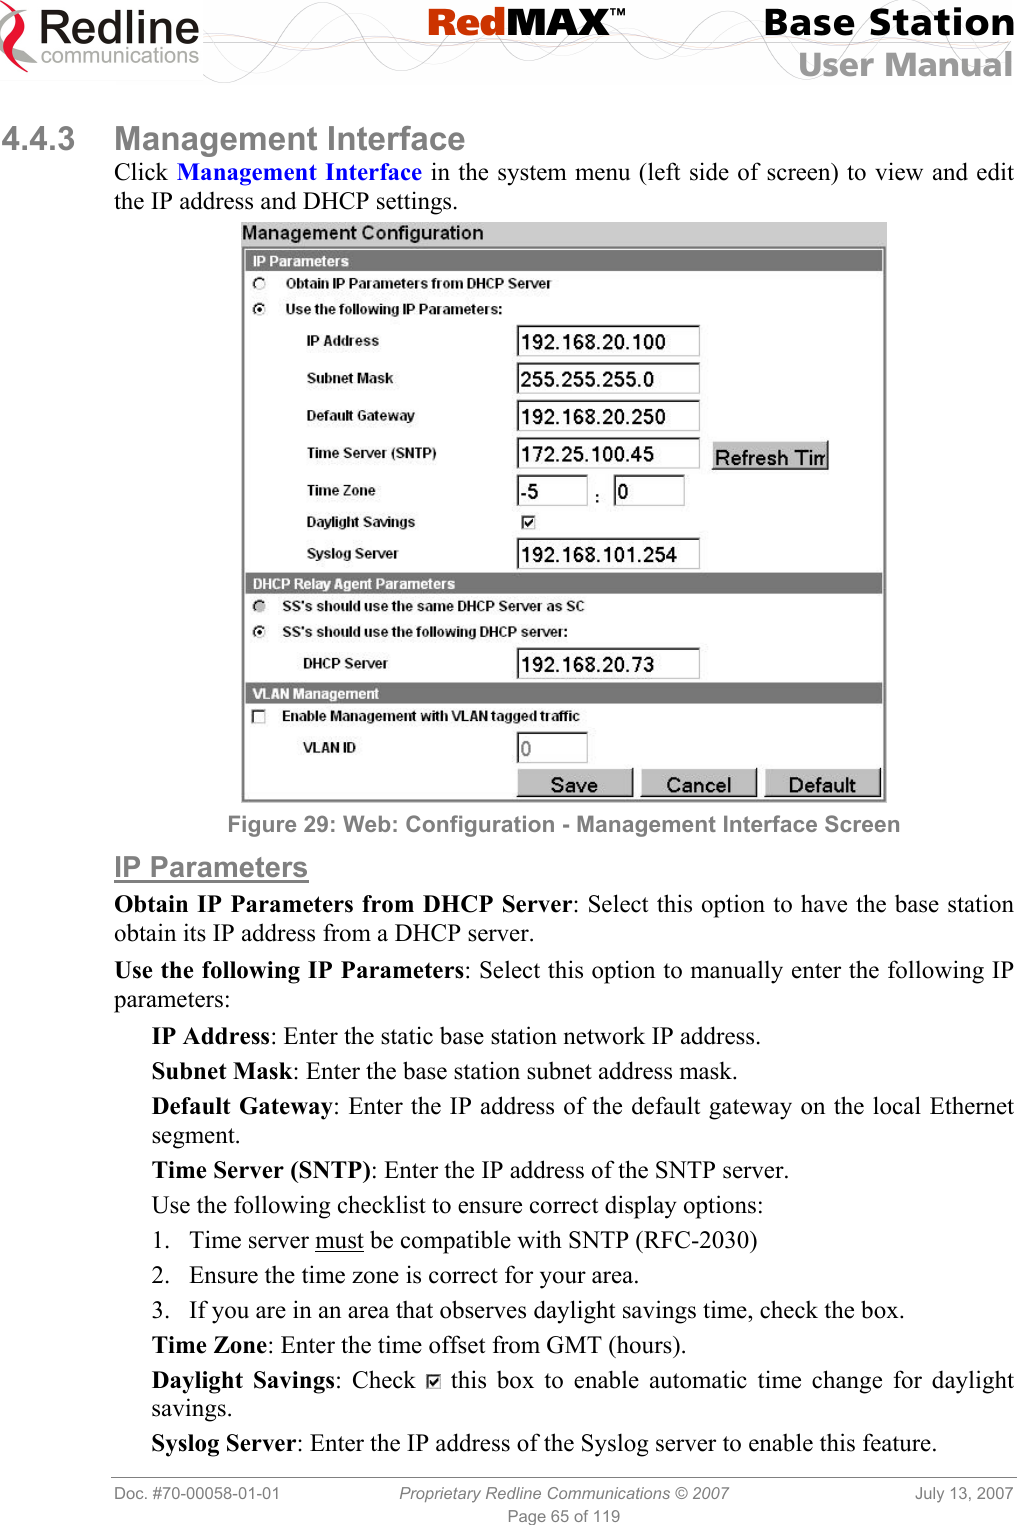  RedMAX™ Base Station User Manual   Doc. #70-00058-01-01  Proprietary Redline Communications © 2007  July 13, 2007 Page 65 of 119  4.4.3 Management Interface Click Management Interface in the system menu (left side of screen) to view and edit the IP address and DHCP settings.  Figure 29: Web: Configuration - Management Interface Screen IP Parameters Obtain IP Parameters from DHCP Server: Select this option to have the base station obtain its IP address from a DHCP server. Use the following IP Parameters: Select this option to manually enter the following IP parameters: IP Address: Enter the static base station network IP address. Subnet Mask: Enter the base station subnet address mask. Default Gateway: Enter the IP address of the default gateway on the local Ethernet segment. Time Server (SNTP): Enter the IP address of the SNTP server. Use the following checklist to ensure correct display options: 1.  Time server must be compatible with SNTP (RFC-2030) 2.  Ensure the time zone is correct for your area. 3.  If you are in an area that observes daylight savings time, check the box. Time Zone: Enter the time offset from GMT (hours). Daylight Savings: Check   this box to enable automatic time change for daylight savings. Syslog Server: Enter the IP address of the Syslog server to enable this feature. 